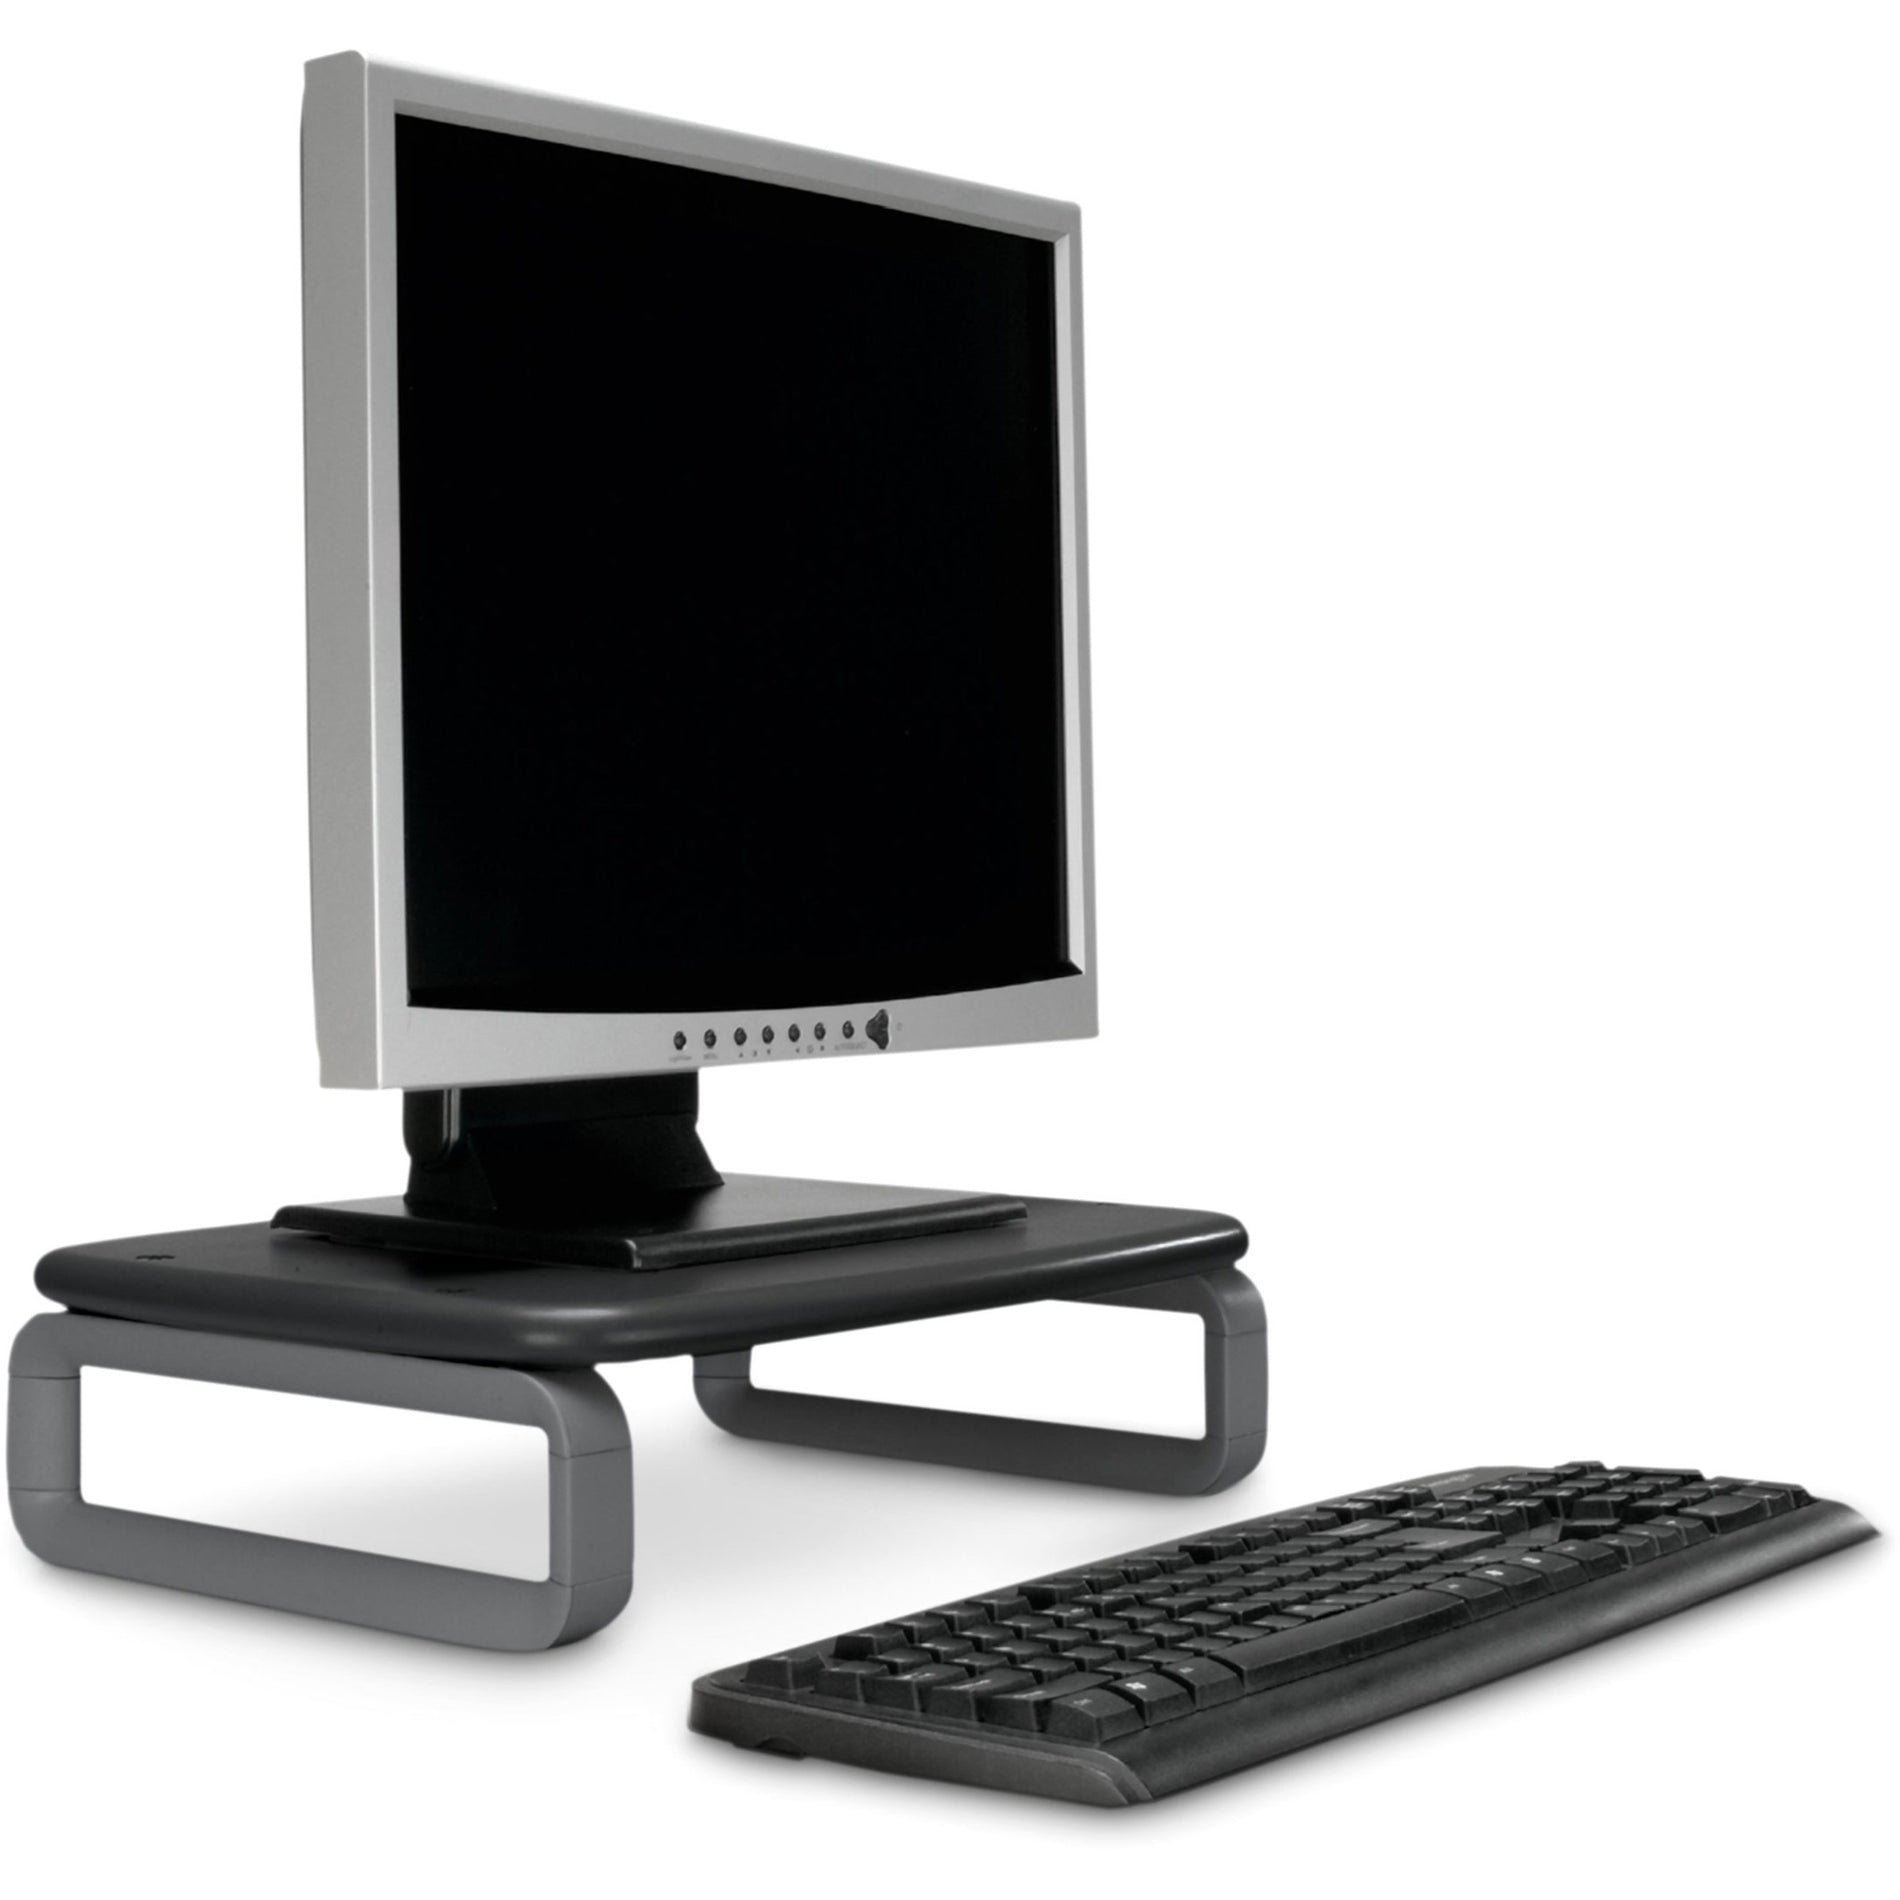 Kensington K60089 SmartFit Monitor Stand Plus for up to 24" screens, Adjustable Height, Space-Saving Design